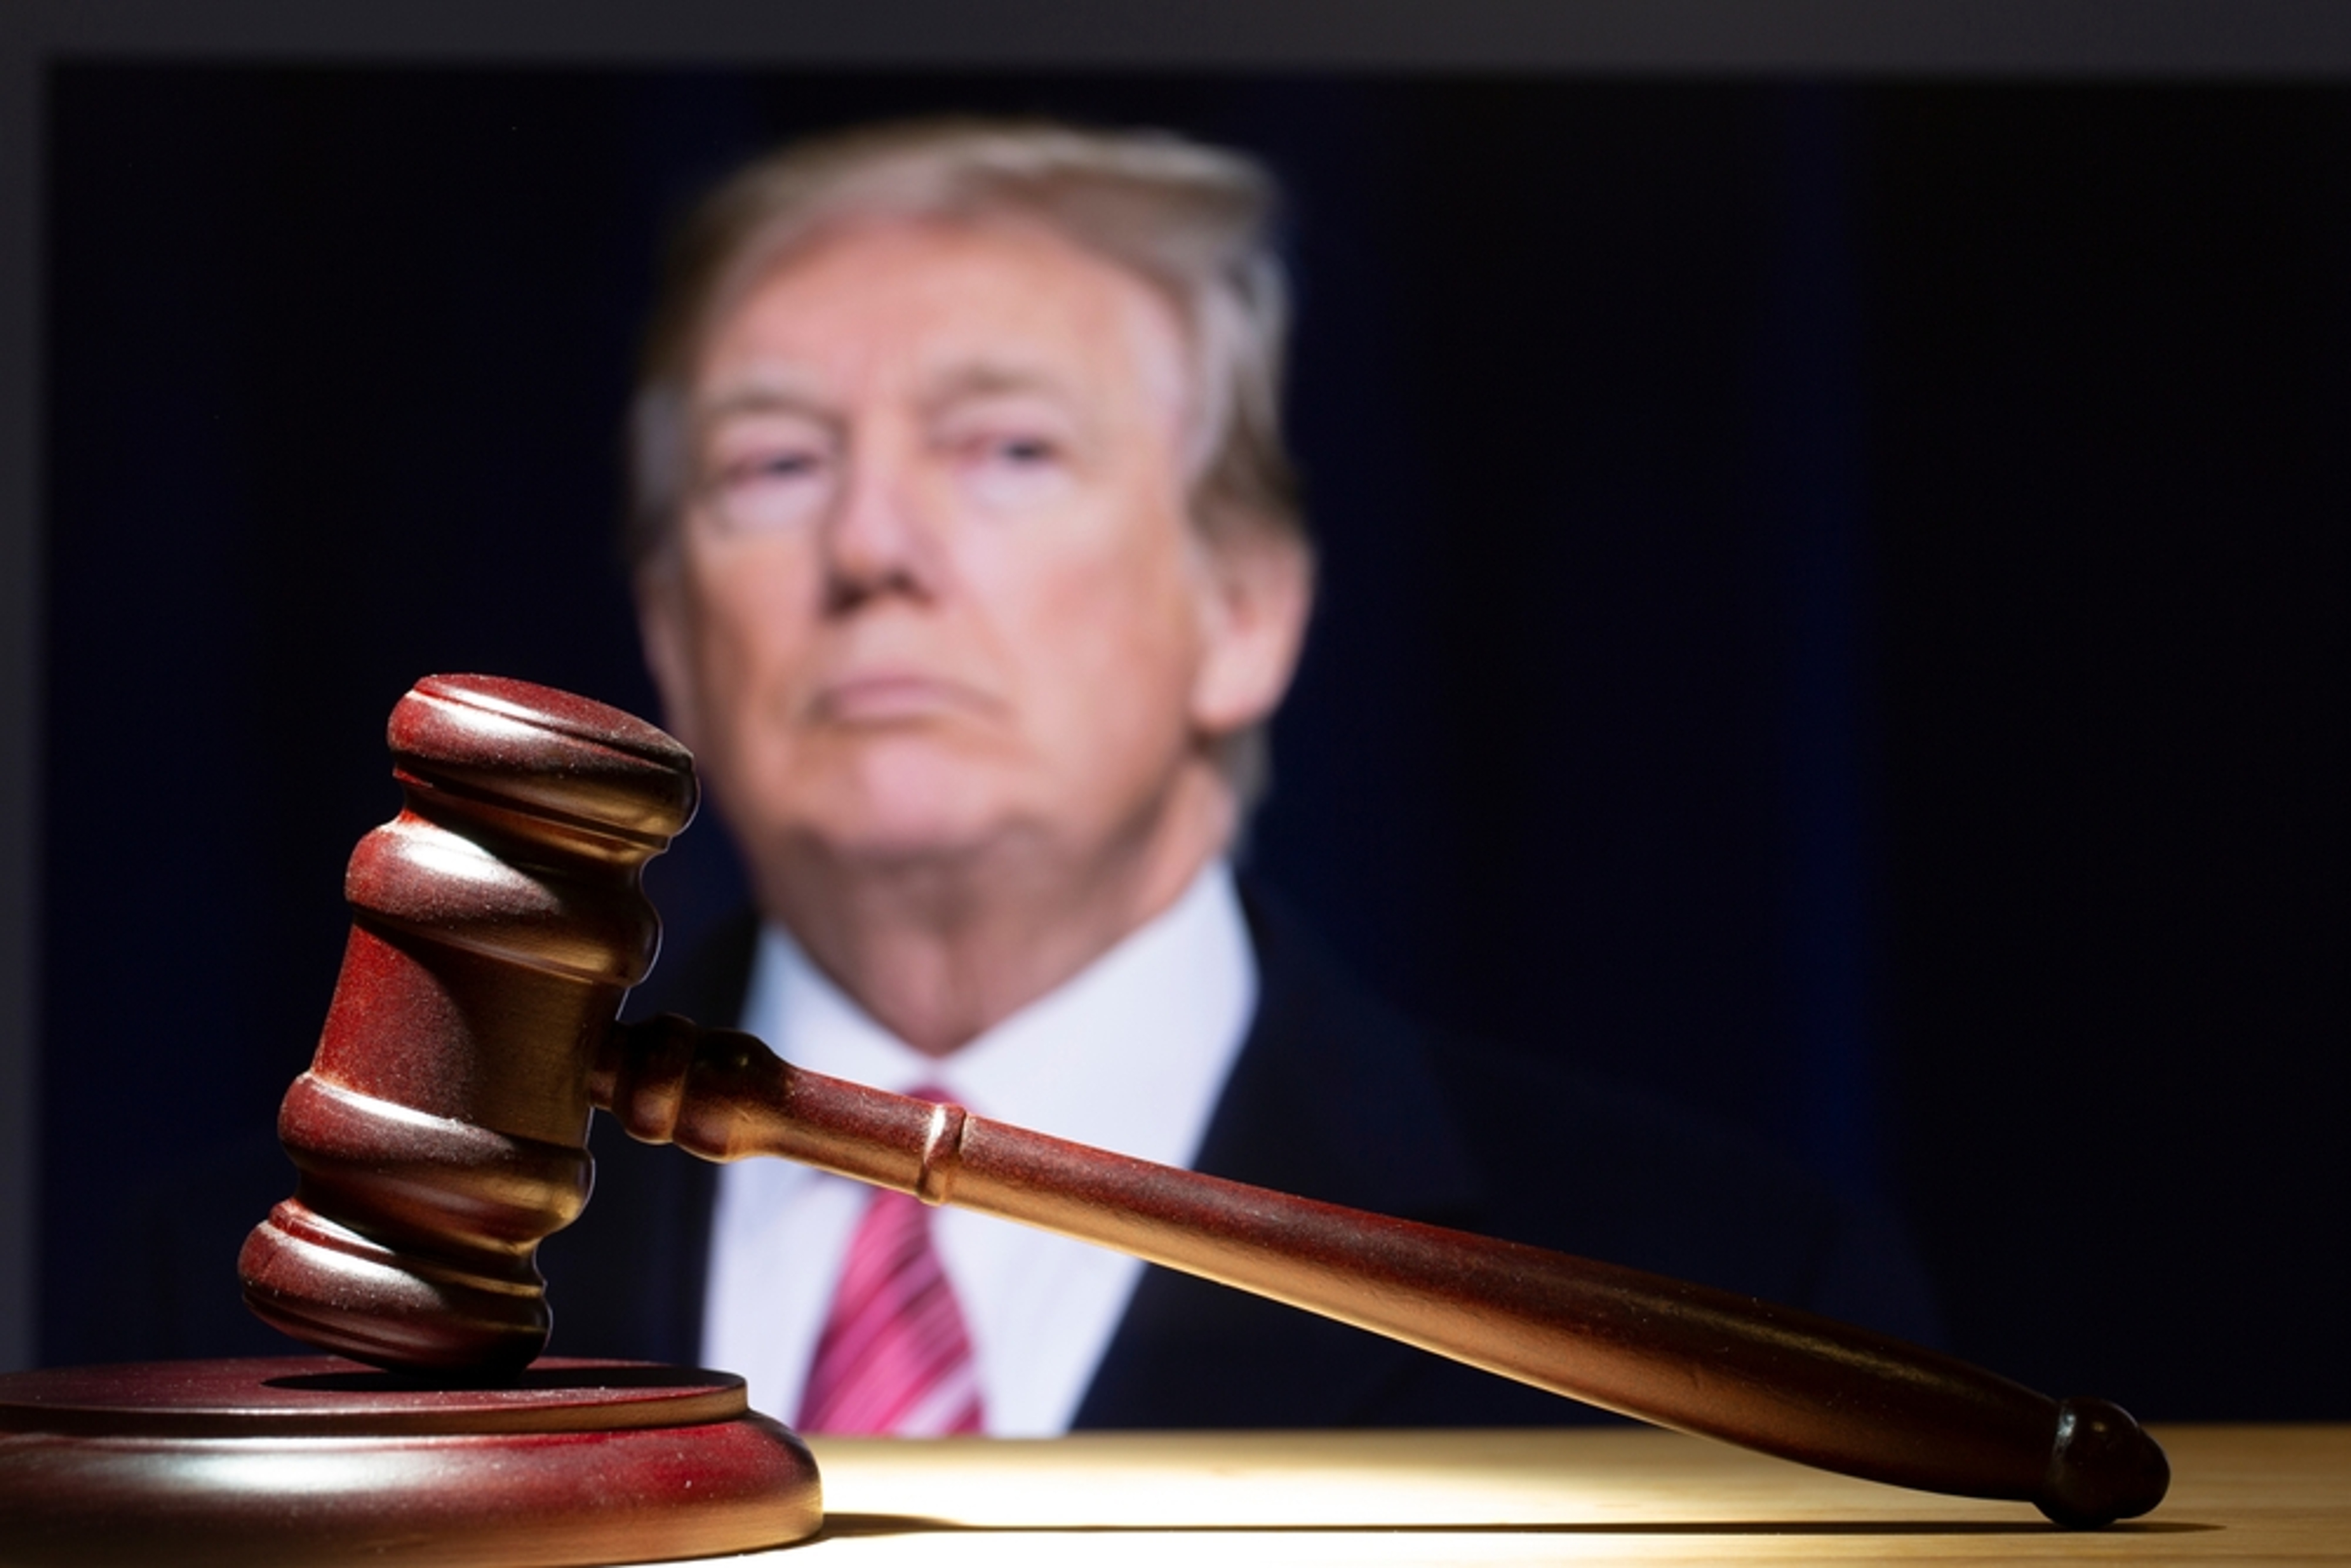 Trump&#39;s Real Estate Empire Committed Fraud, Judge Rules In Lawsuit: &#39;A Fantasy World&#39;